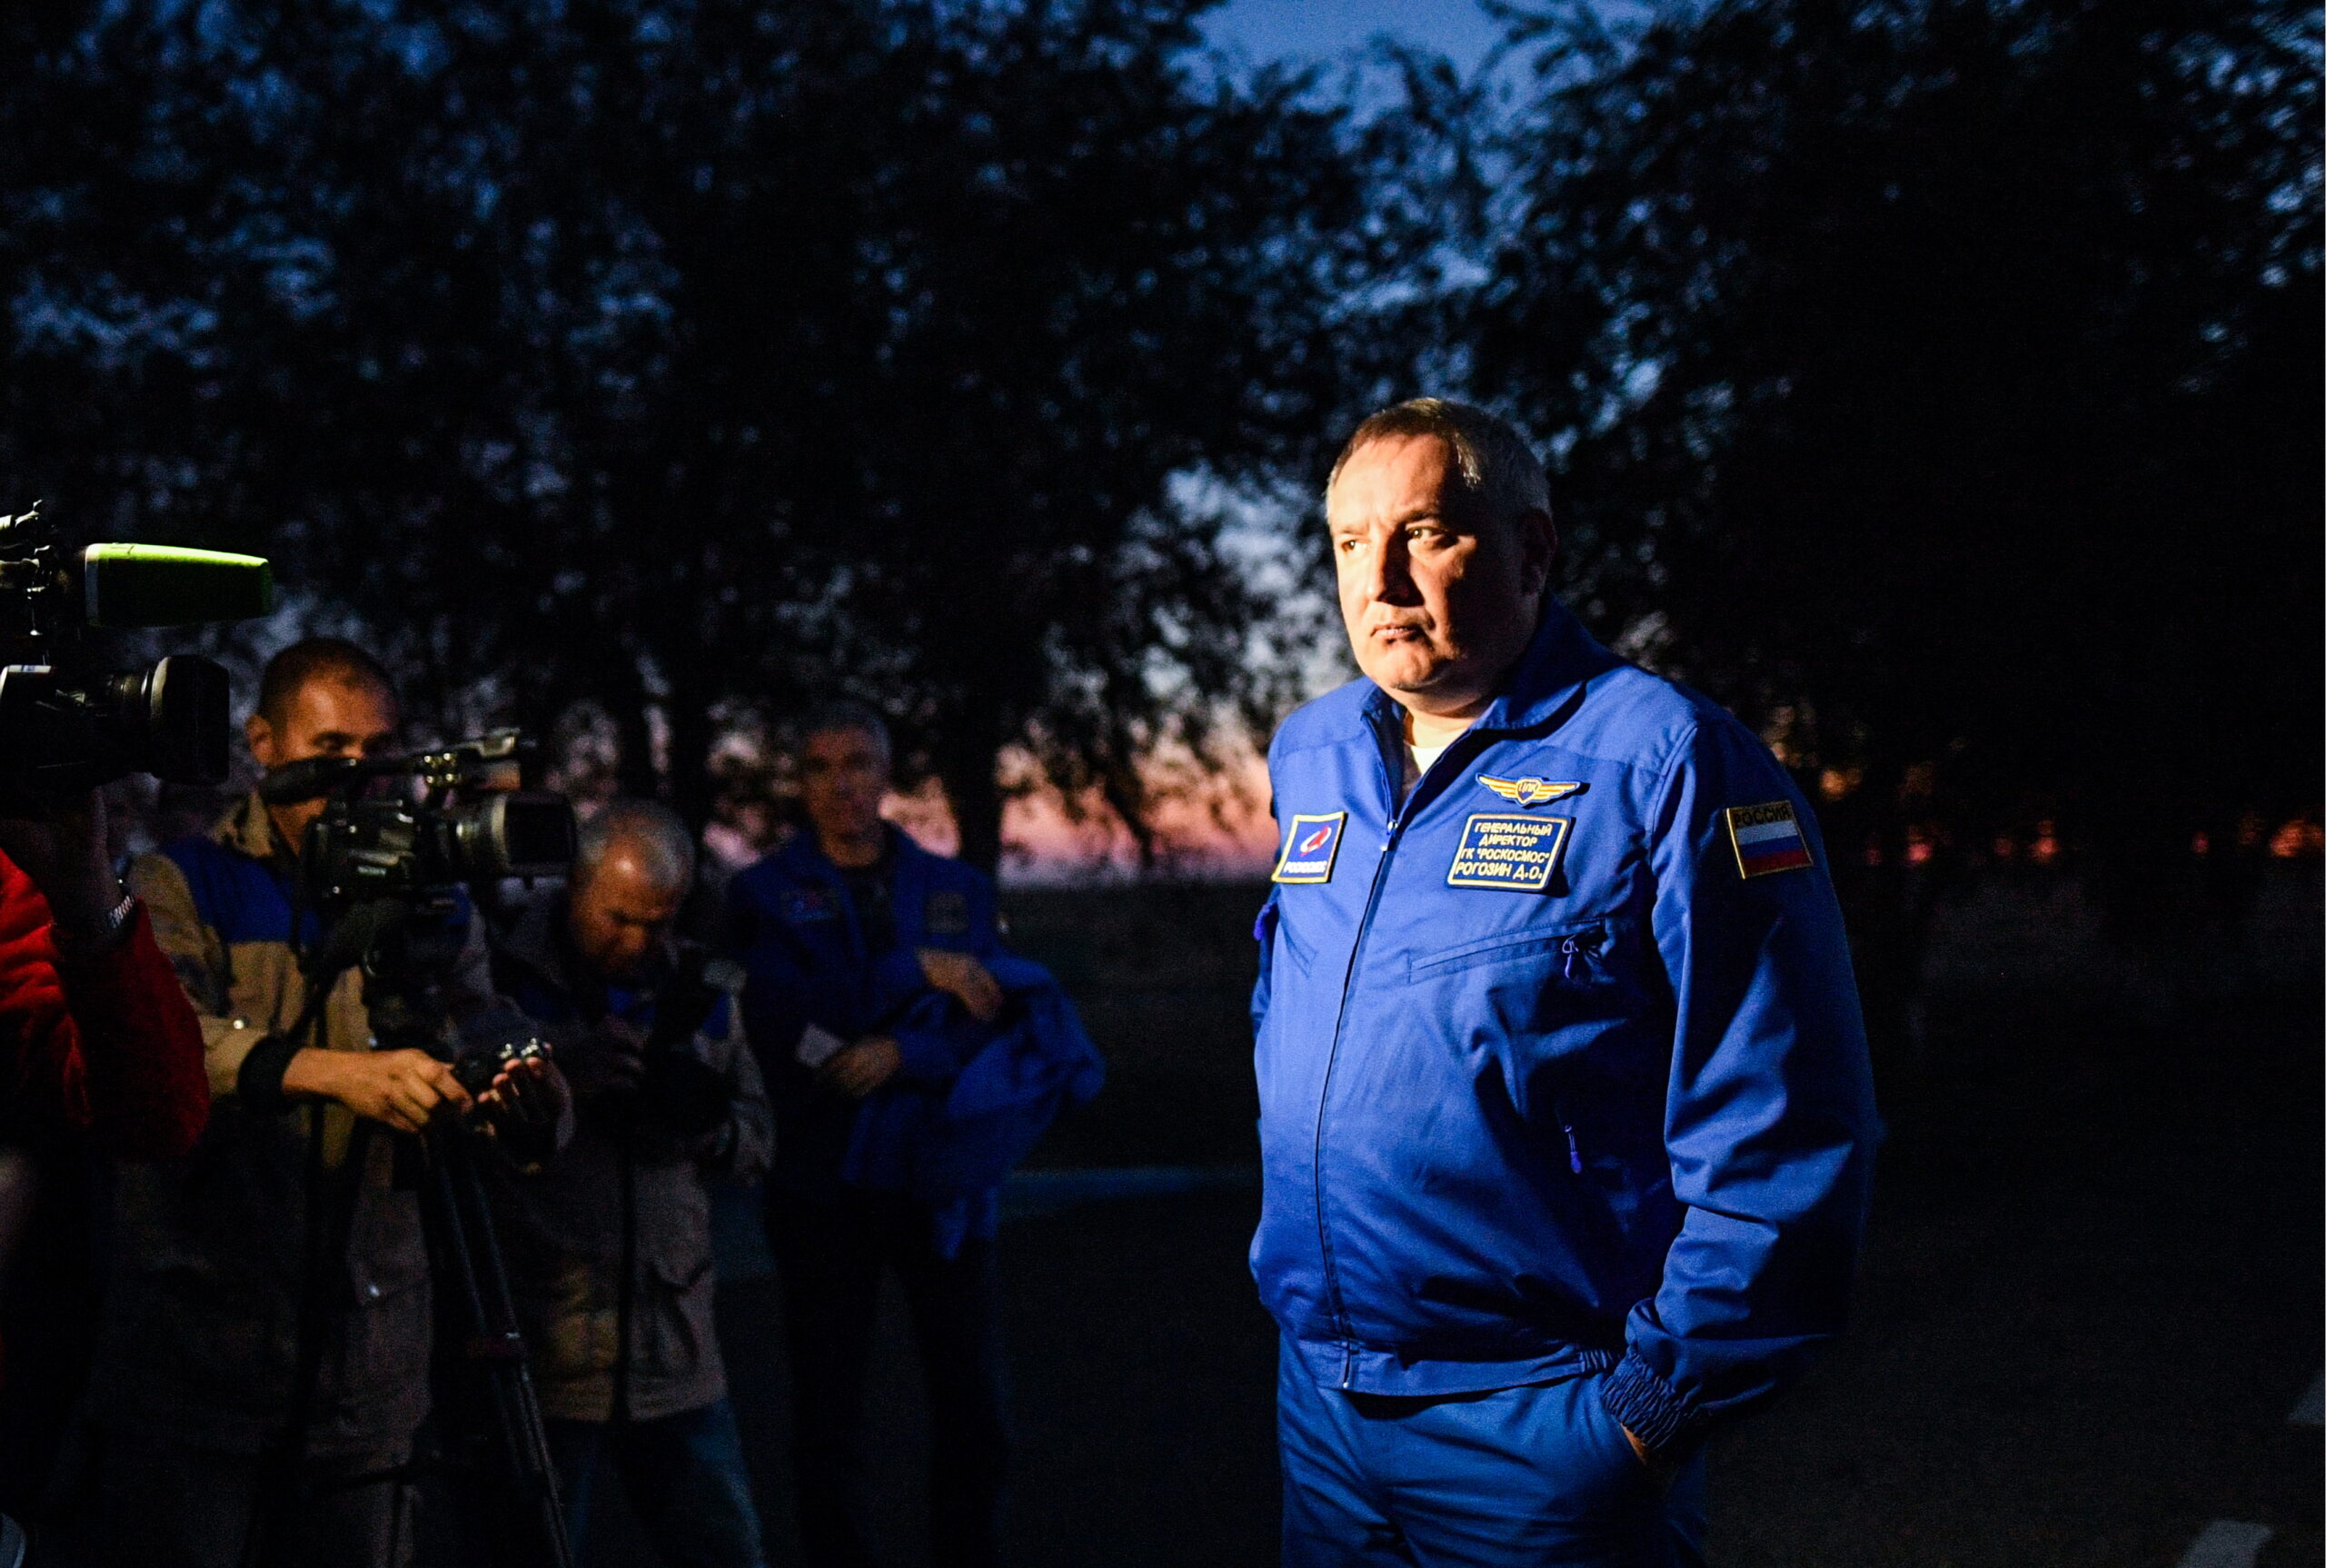 Russia’s space chief wishes his oligarchs invested in space like Branson and Musk